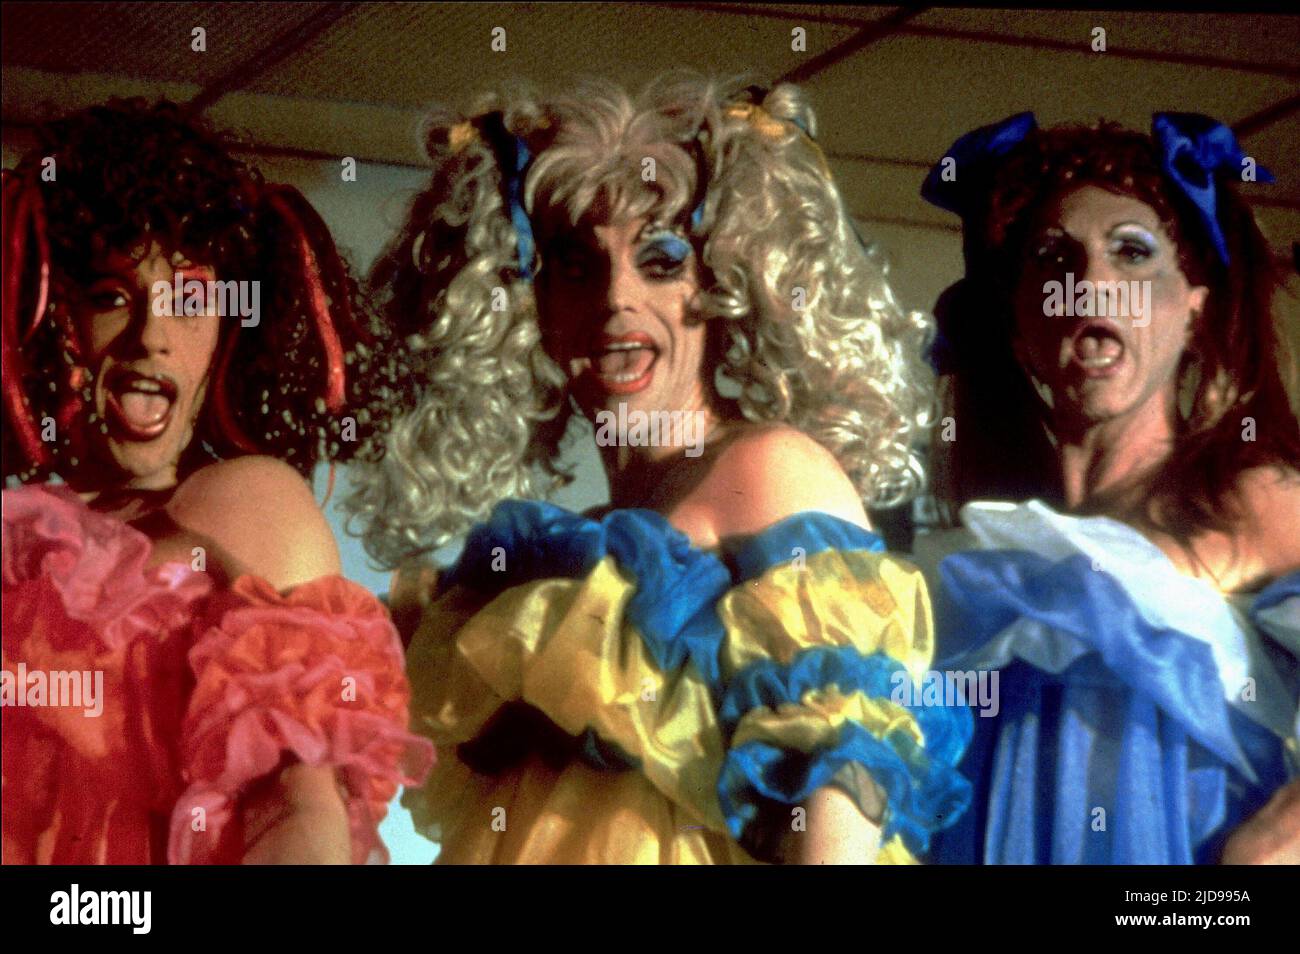 PEARCE,WEAVING,STAMP, THE ADVENTURES OF PRISCILLA and QUEEN OF THE DESERT, 1994, Stock Photo